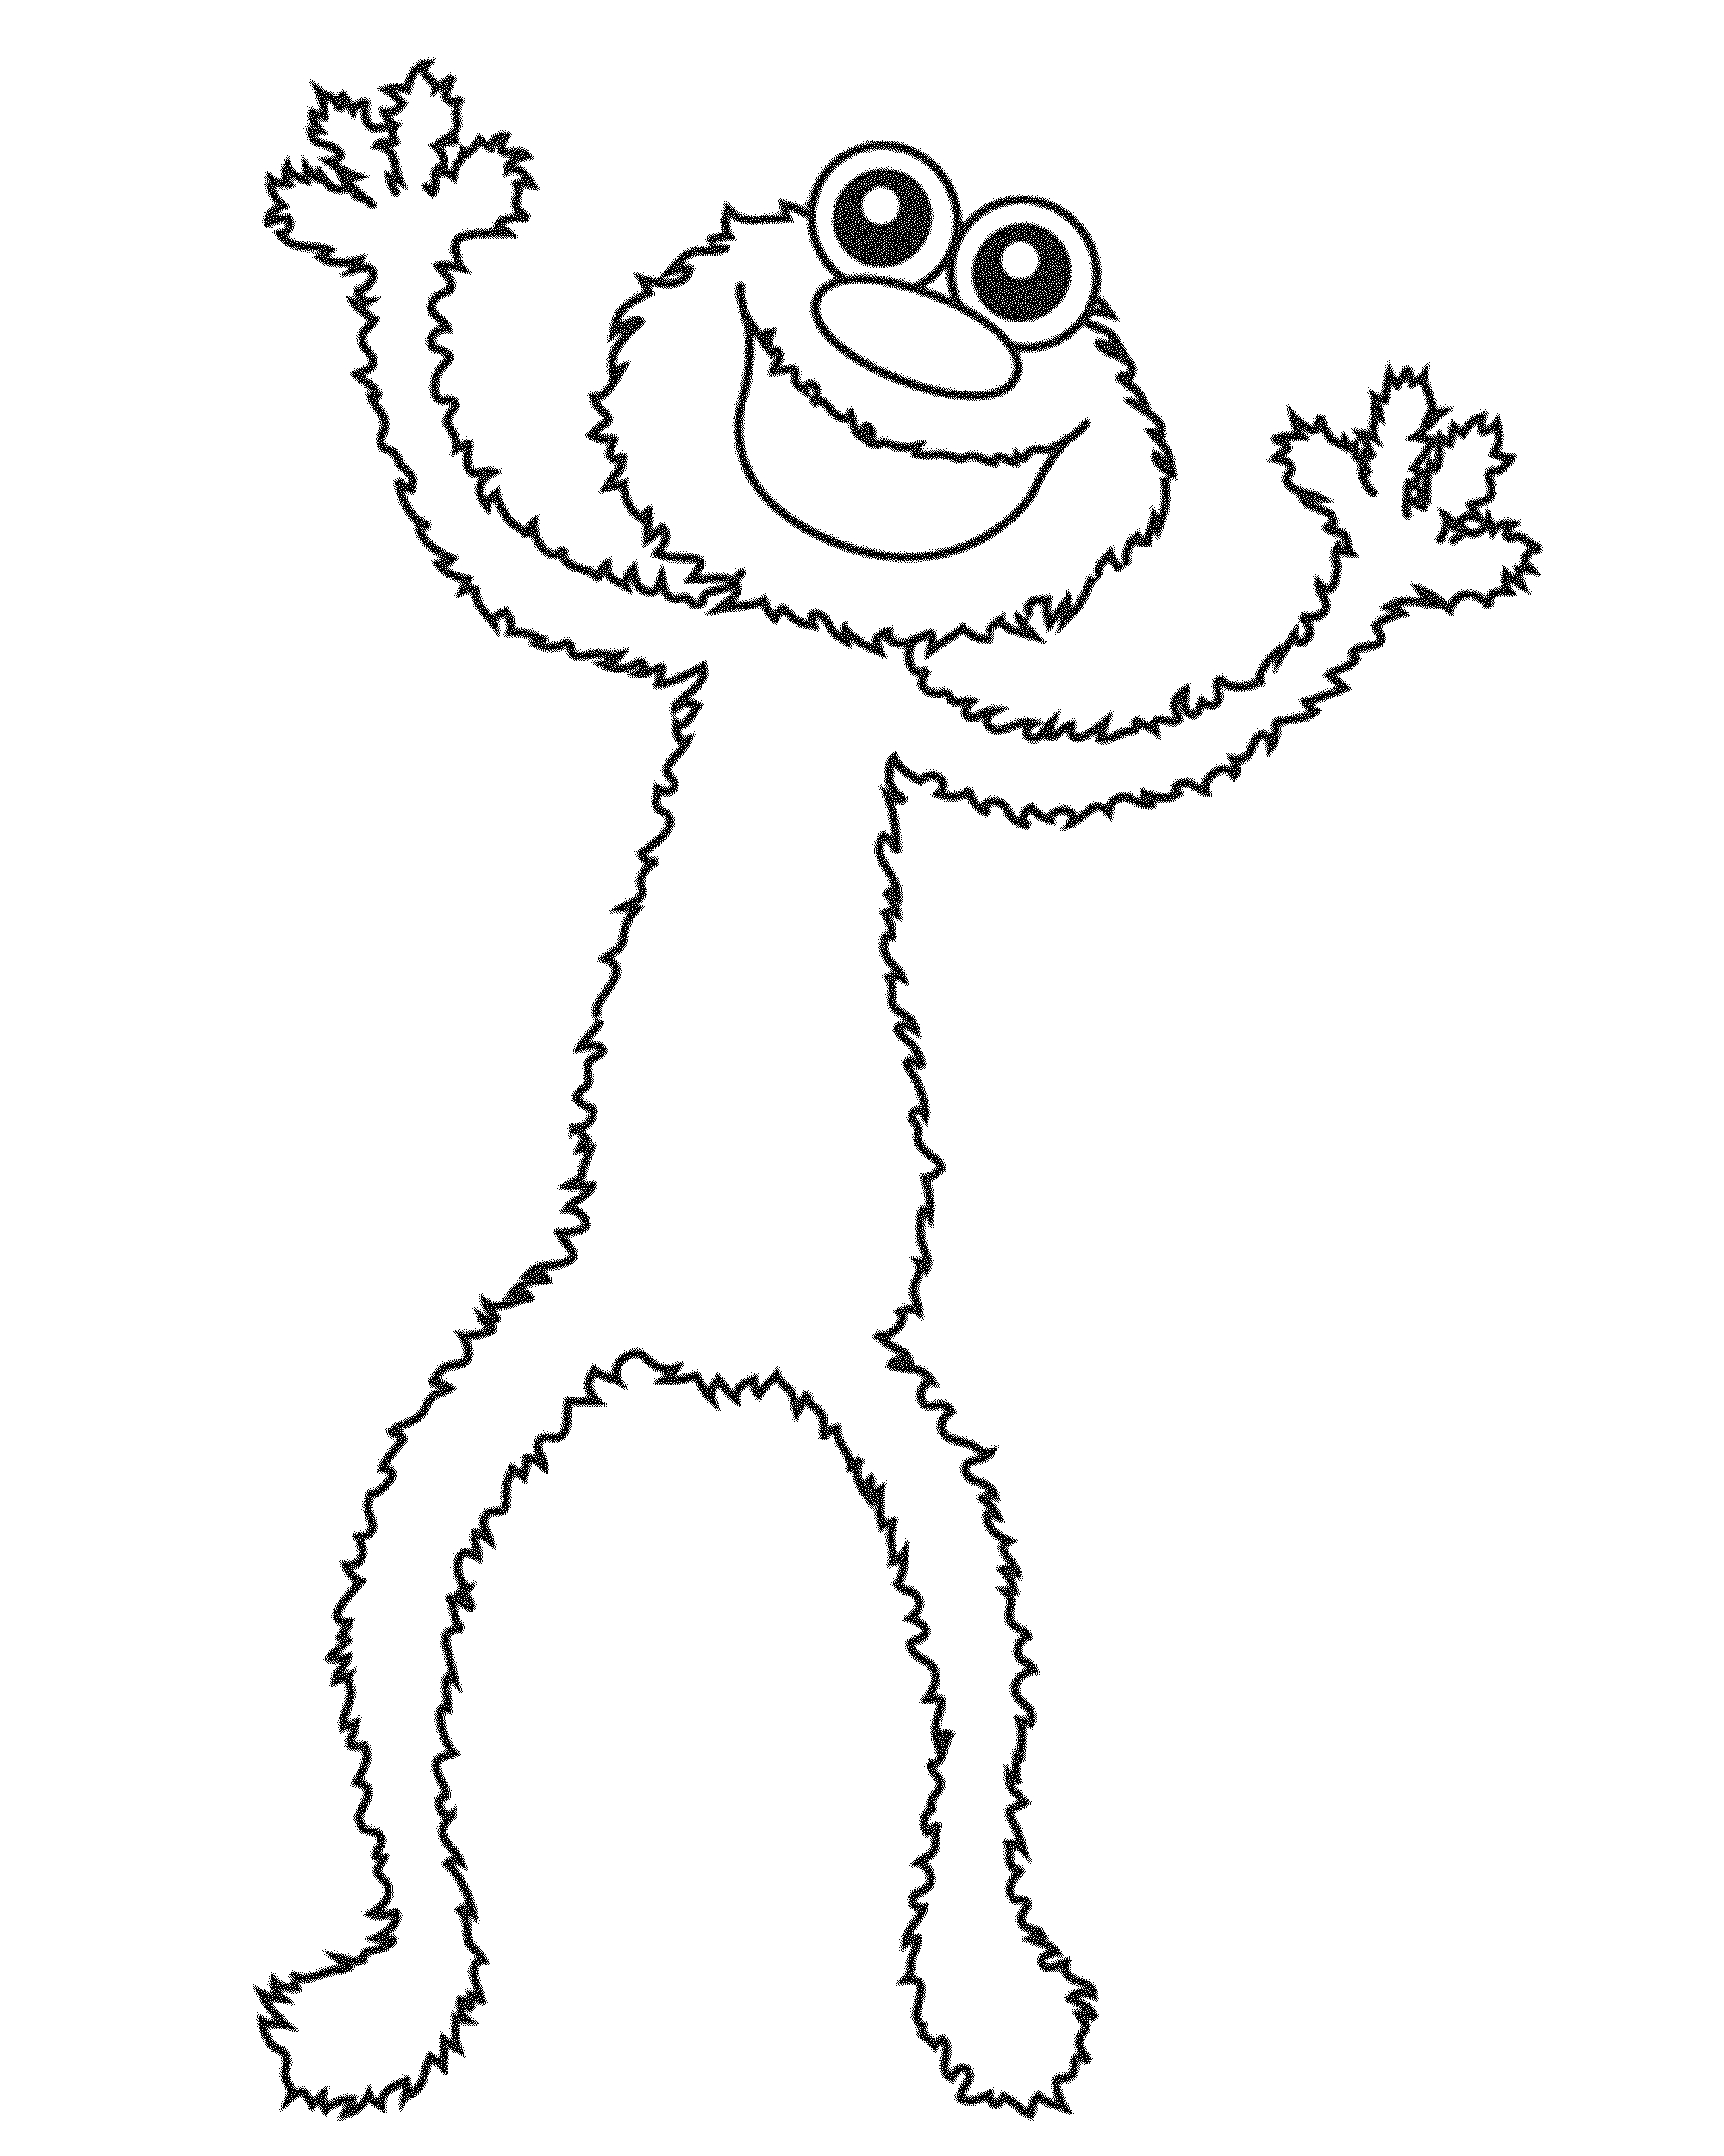 Coloring Pages Of Baby Elmo Elmo Coloring Pages For Childrens Home Activity Best Apps For Kids